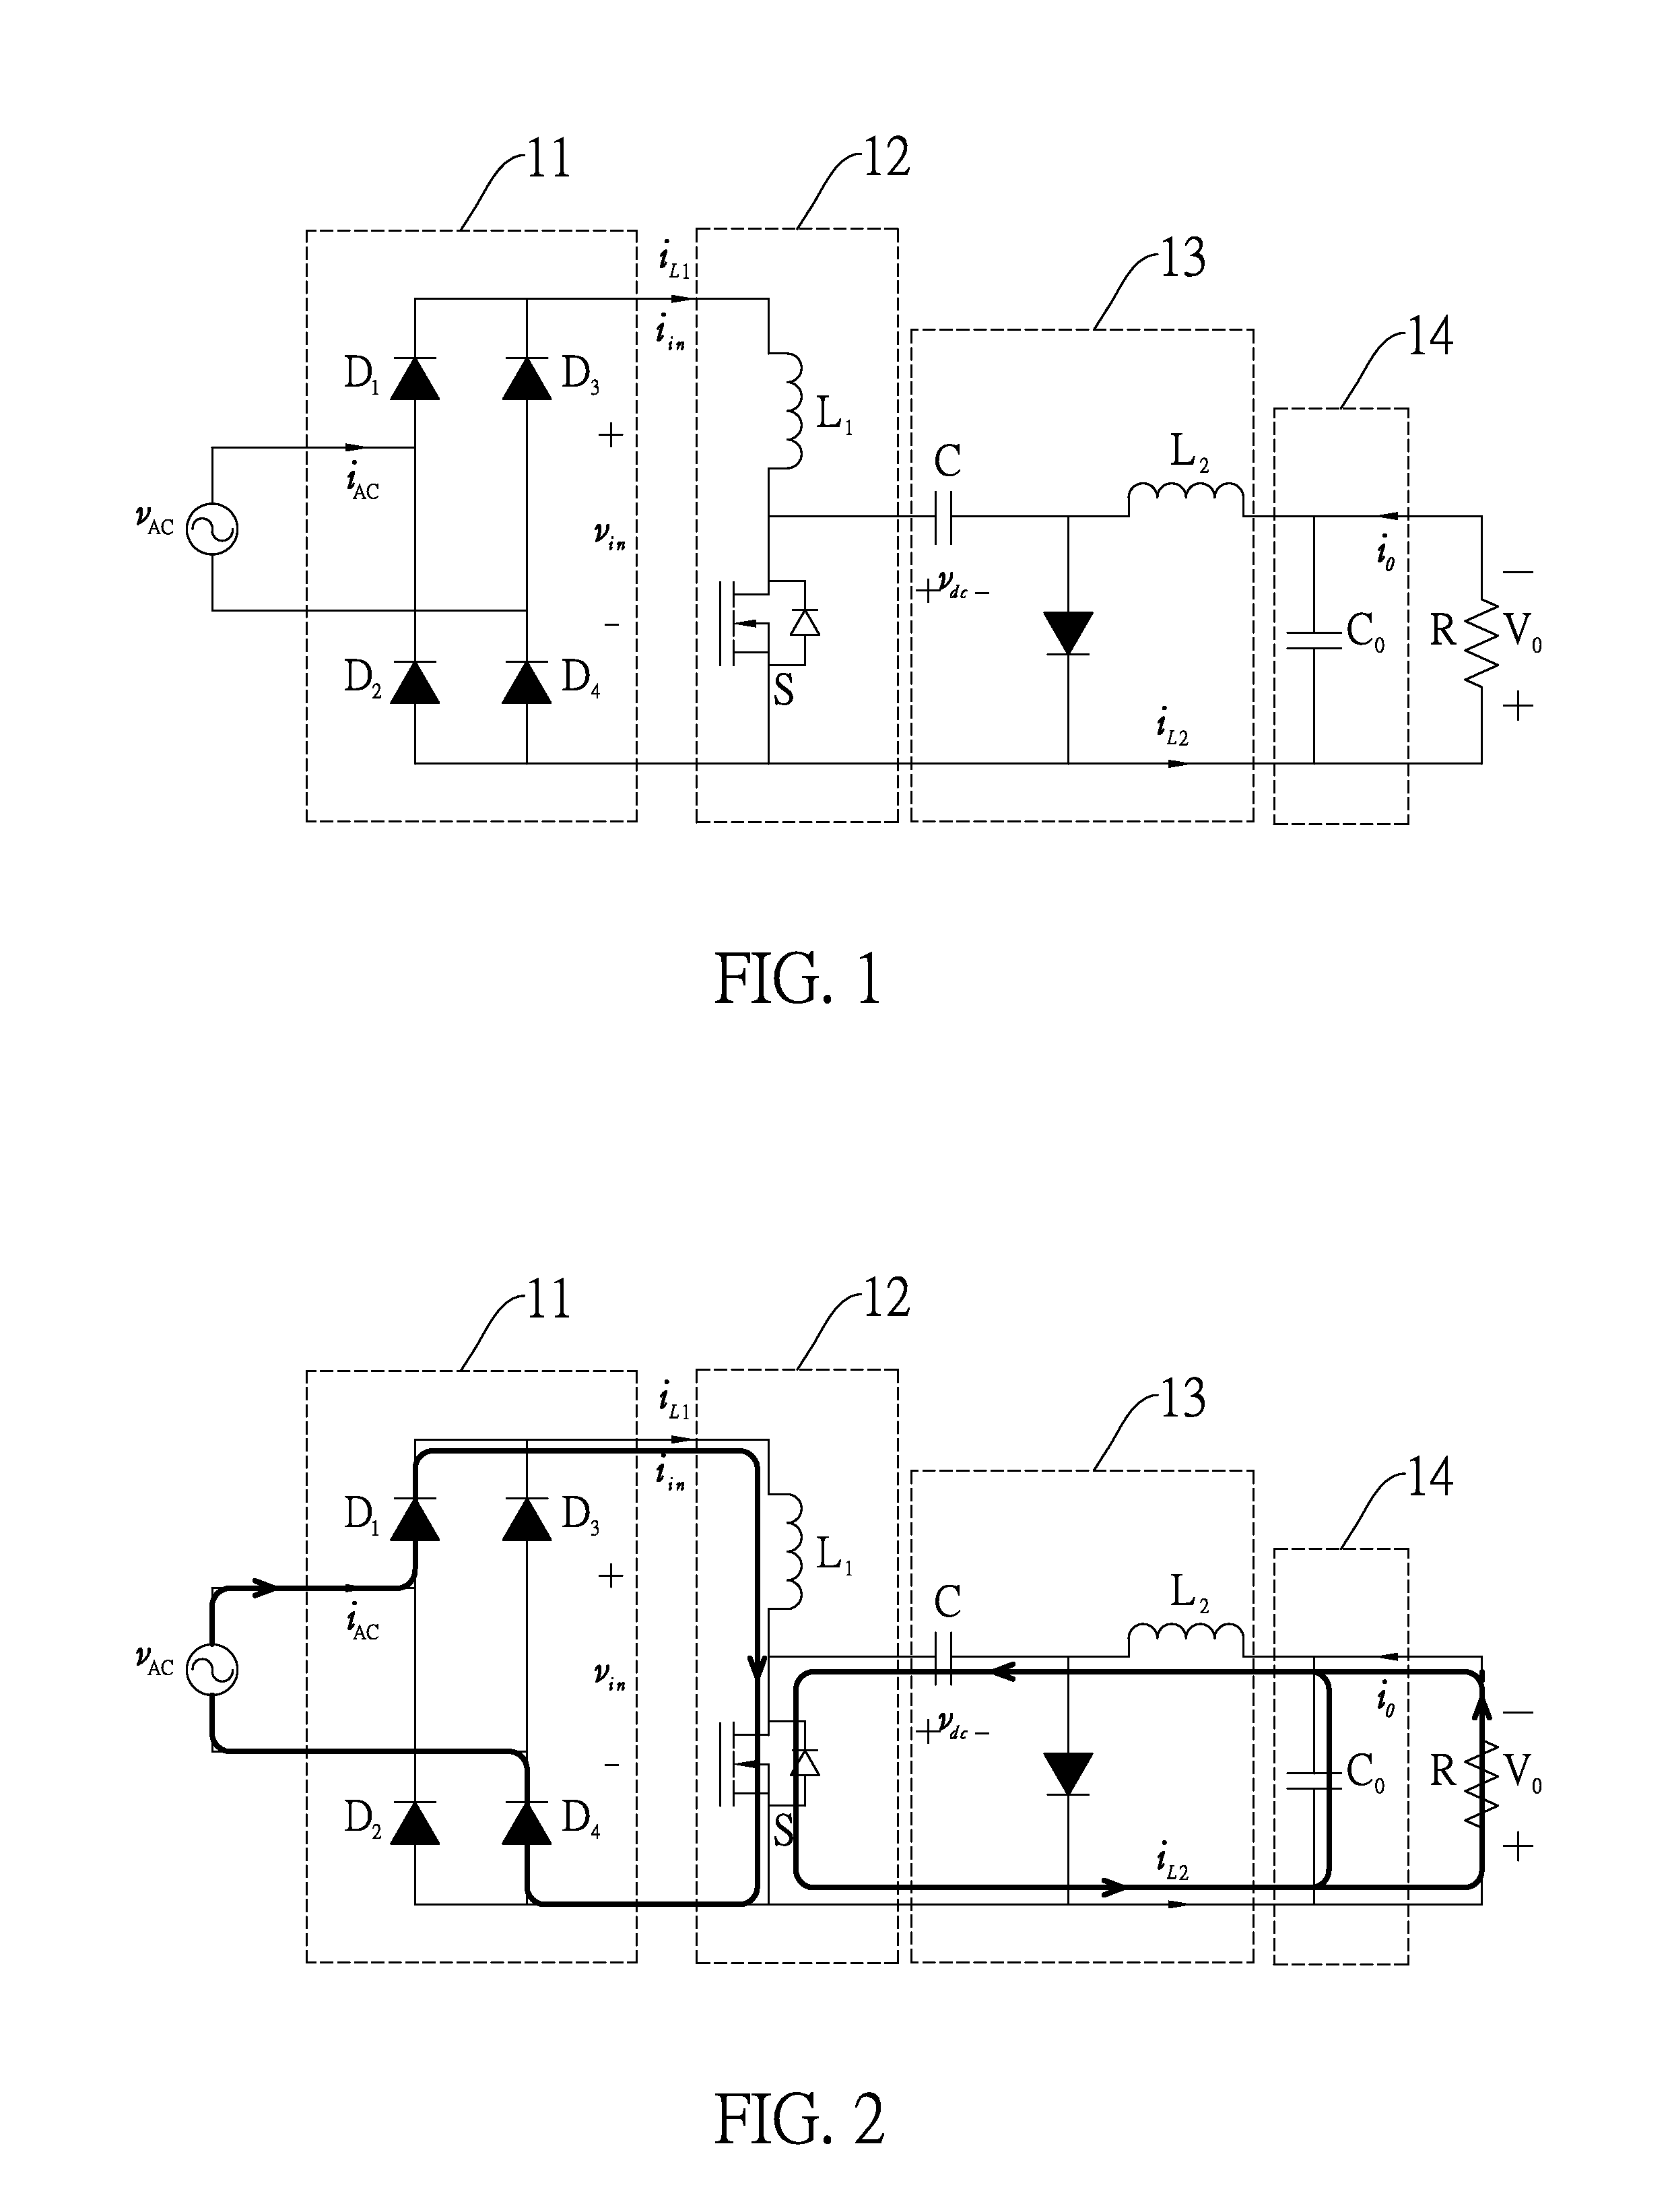 Non-isolated ac/dc converter with power factor correction